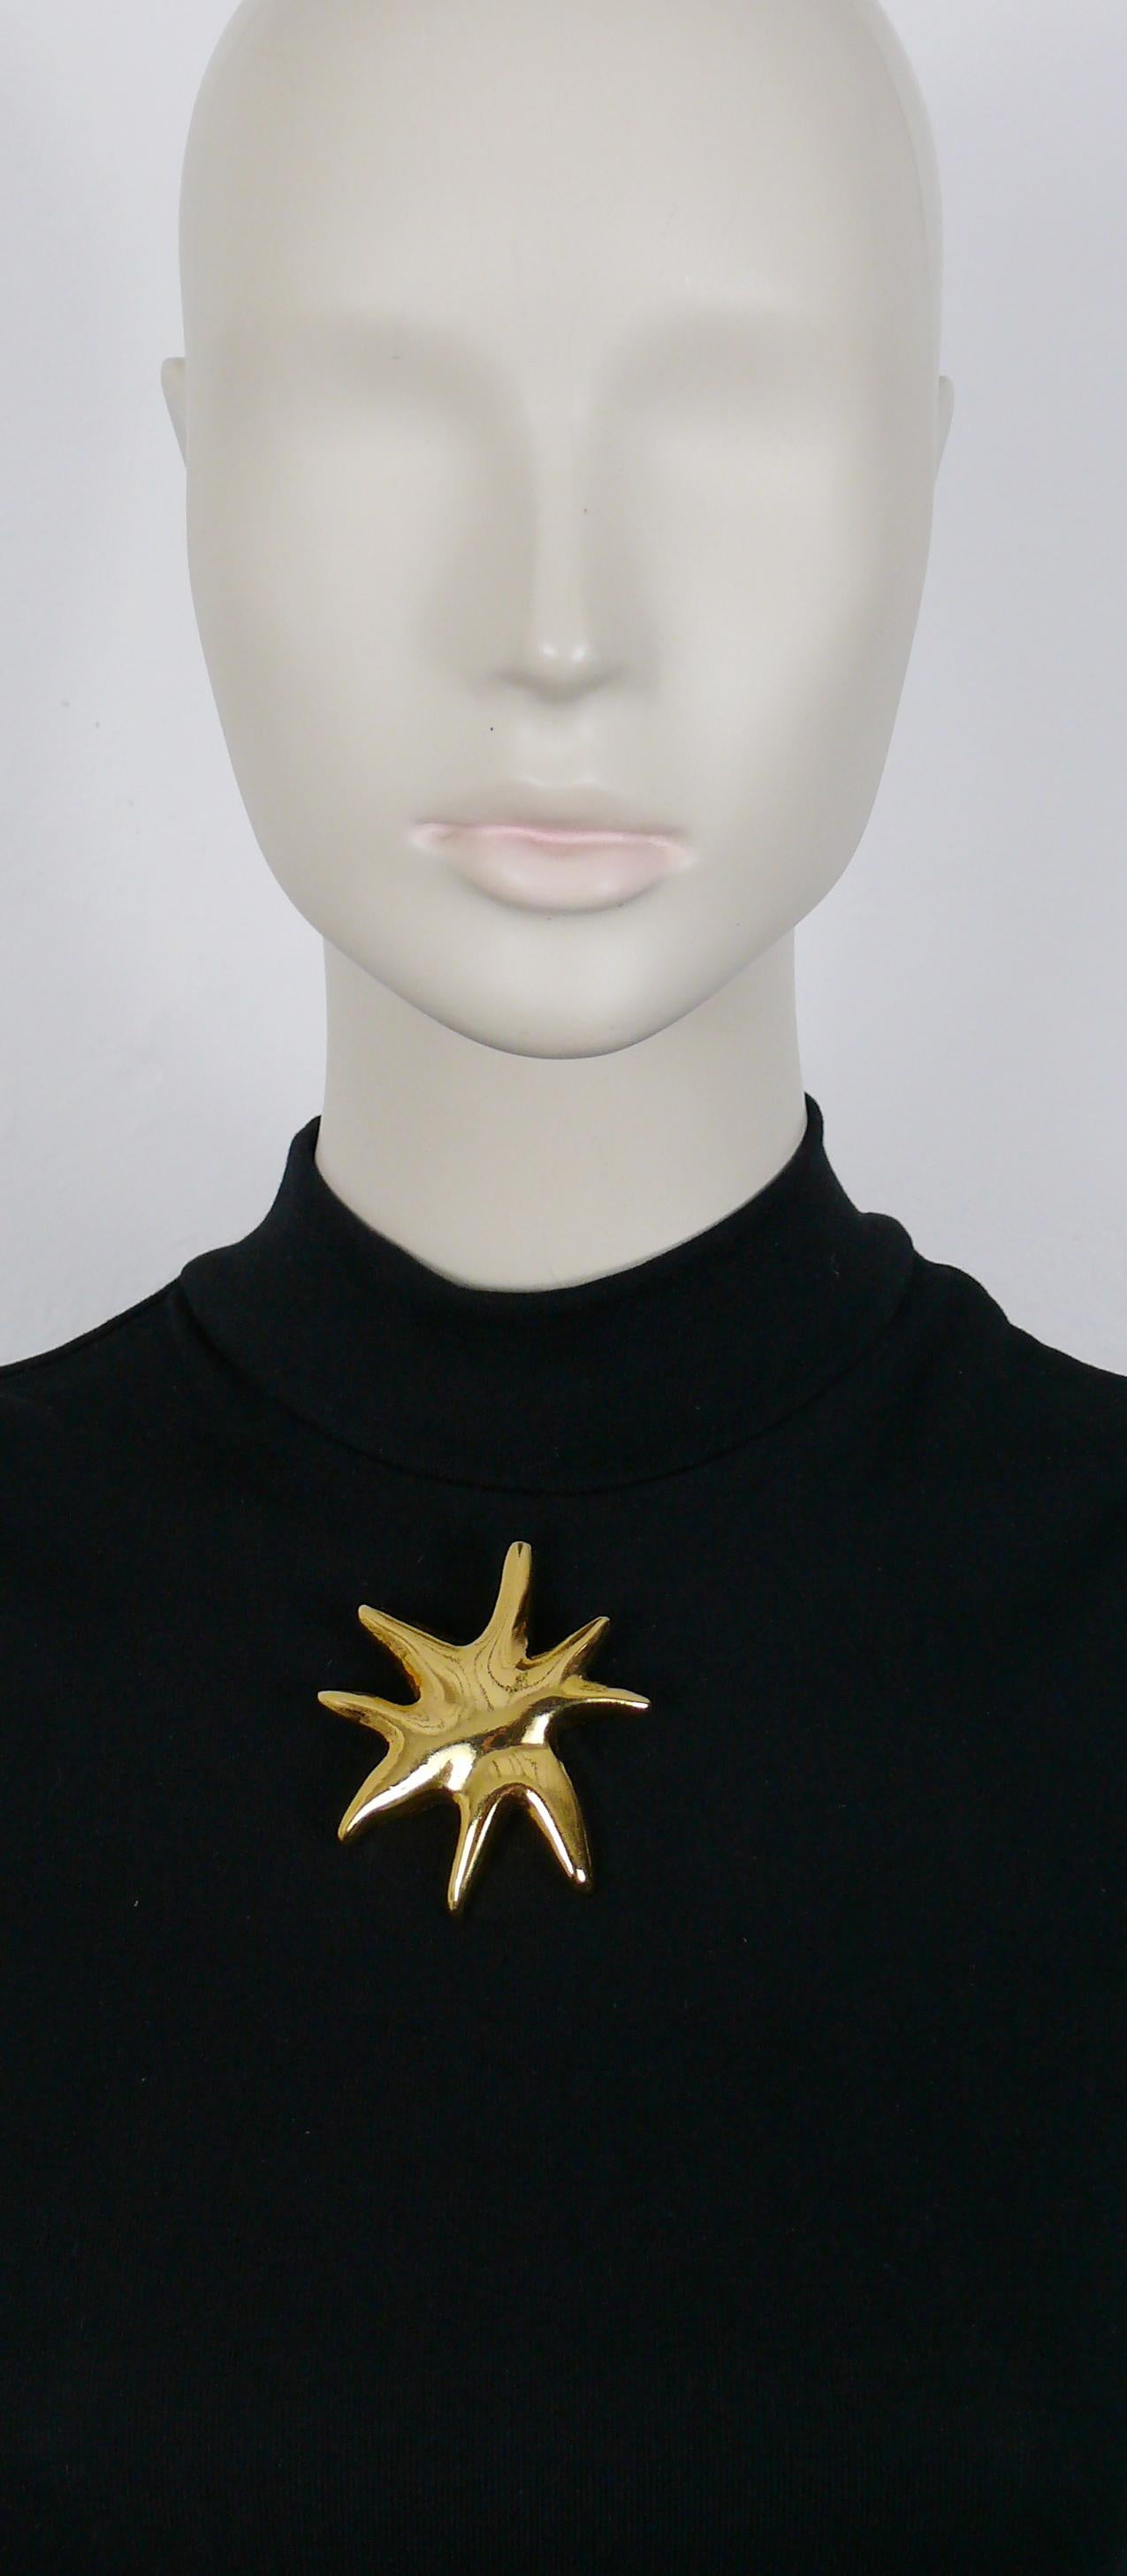 CHRISTIAN LACROIX vintage gold toned resin iconic starburst brooch.

Marked CHRISTIAN LACROIX CL Made in France.

Indicative measurements : max. width approx. 6.1 cm (2.40 inches) / max. height approx. 7 cm (2.76 inches).


NOTES
- This is a